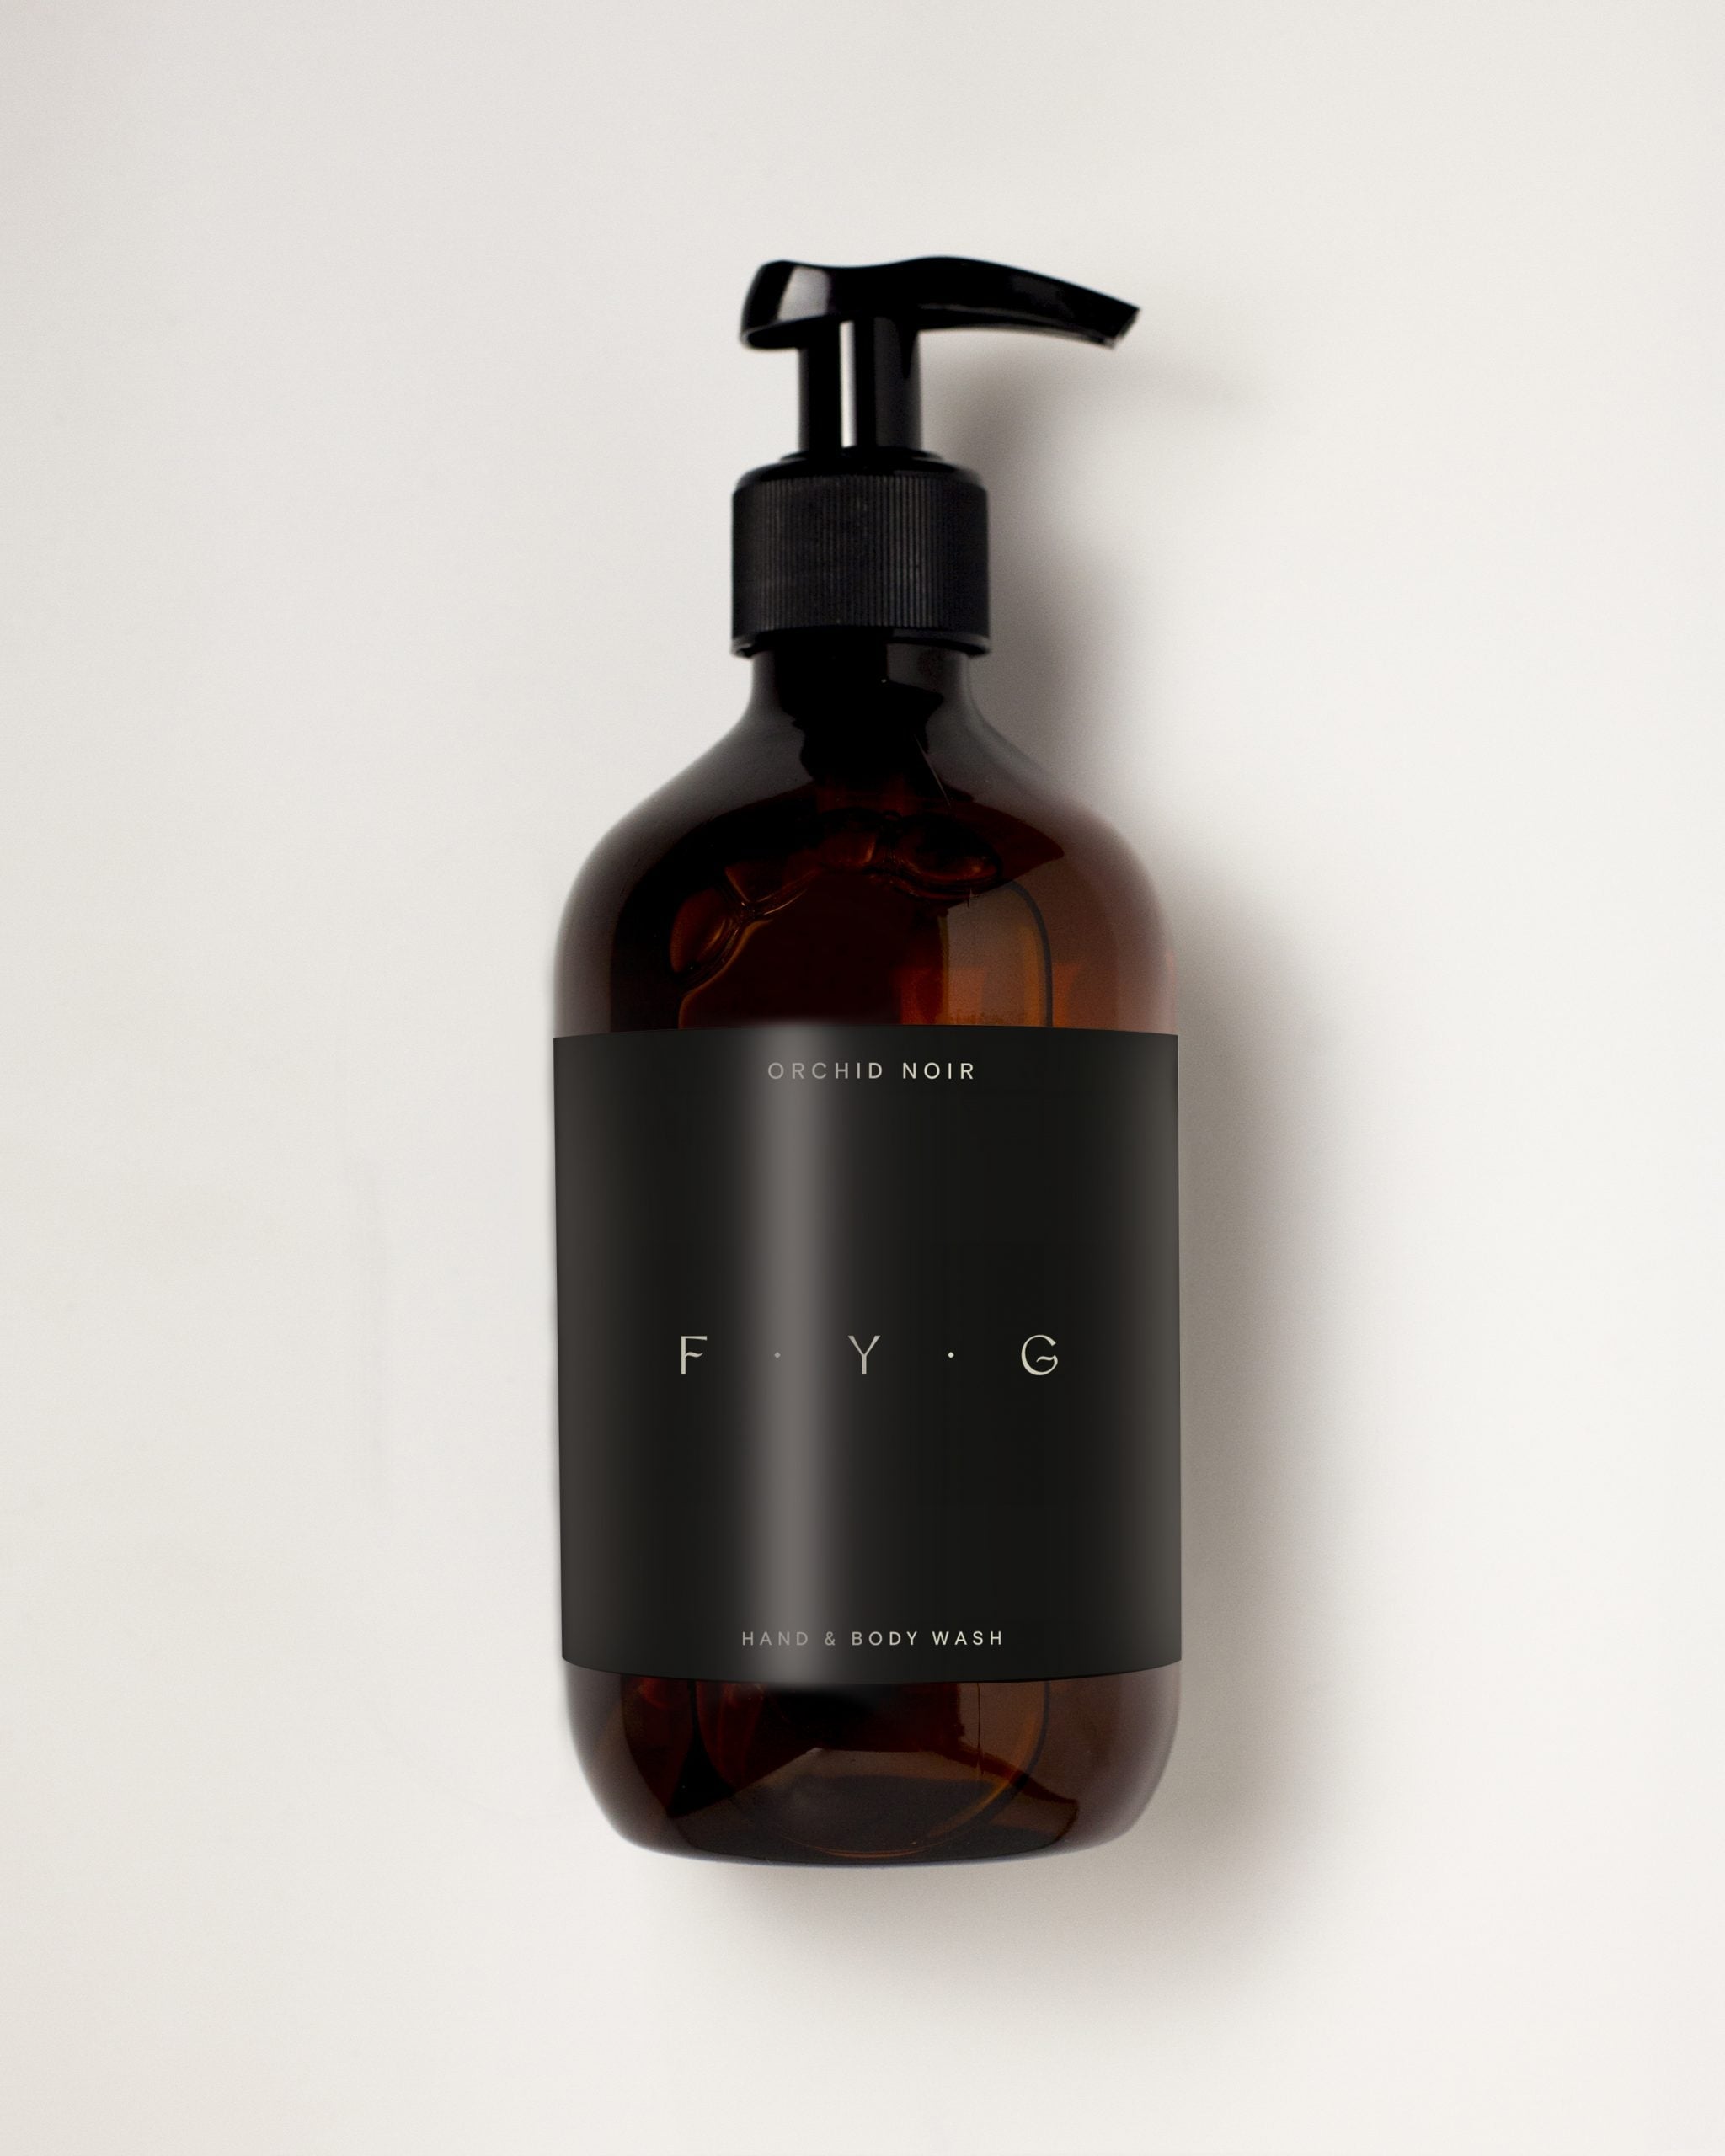 Find Your Glow Orchid Noir Hand & Body Wash